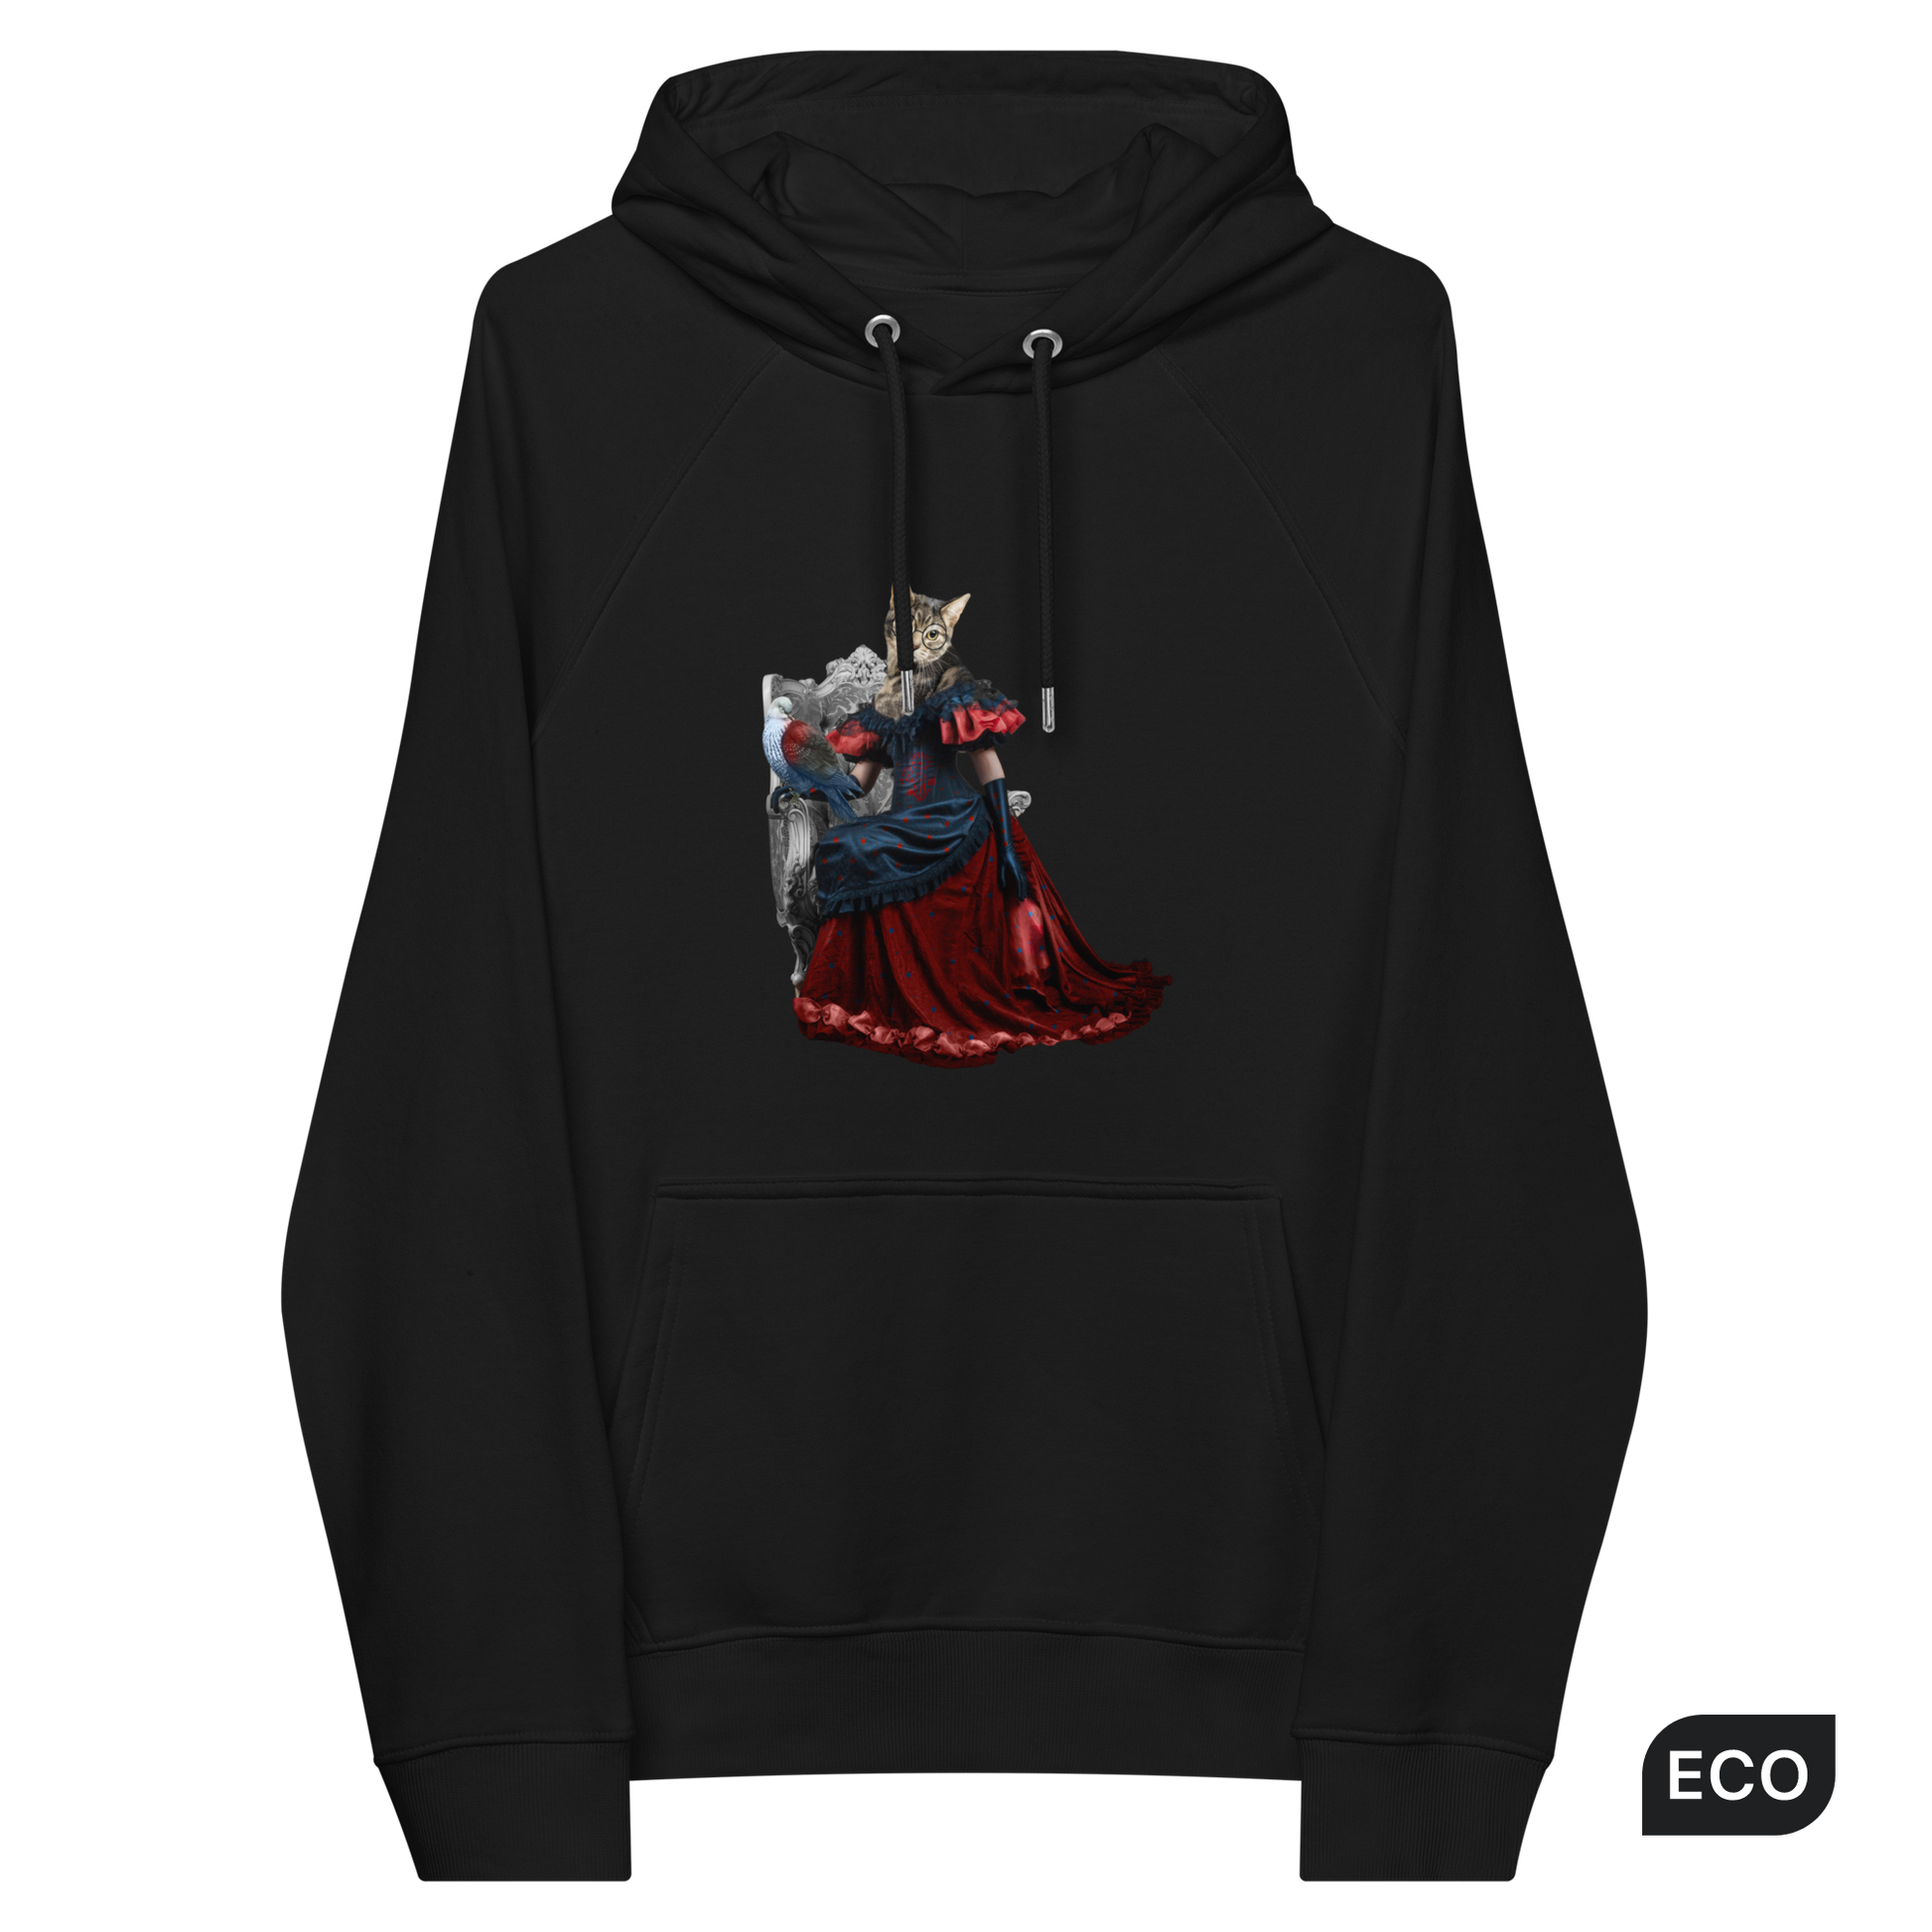 Black Anthropomorphic Cat Raglan Hoodie featuring an adorable Anthropomorphic Cat graphic on the chest - Cute Graphic Cat Hoodies - Boozy Fox